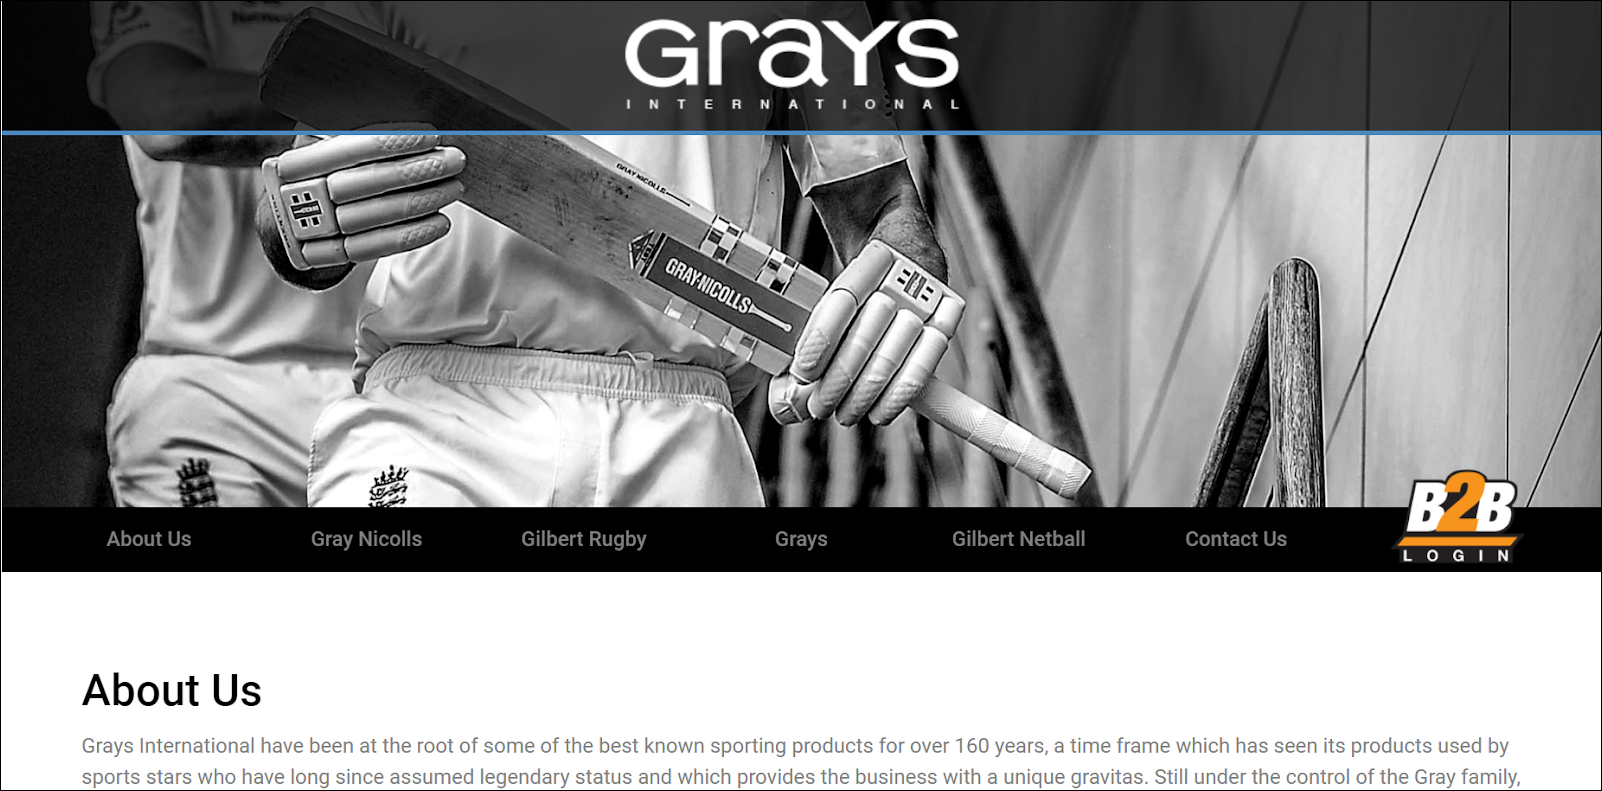 Outgrow Interactive Case Study: How Grays International Generated 19k+ Leads, Engagement and Much More